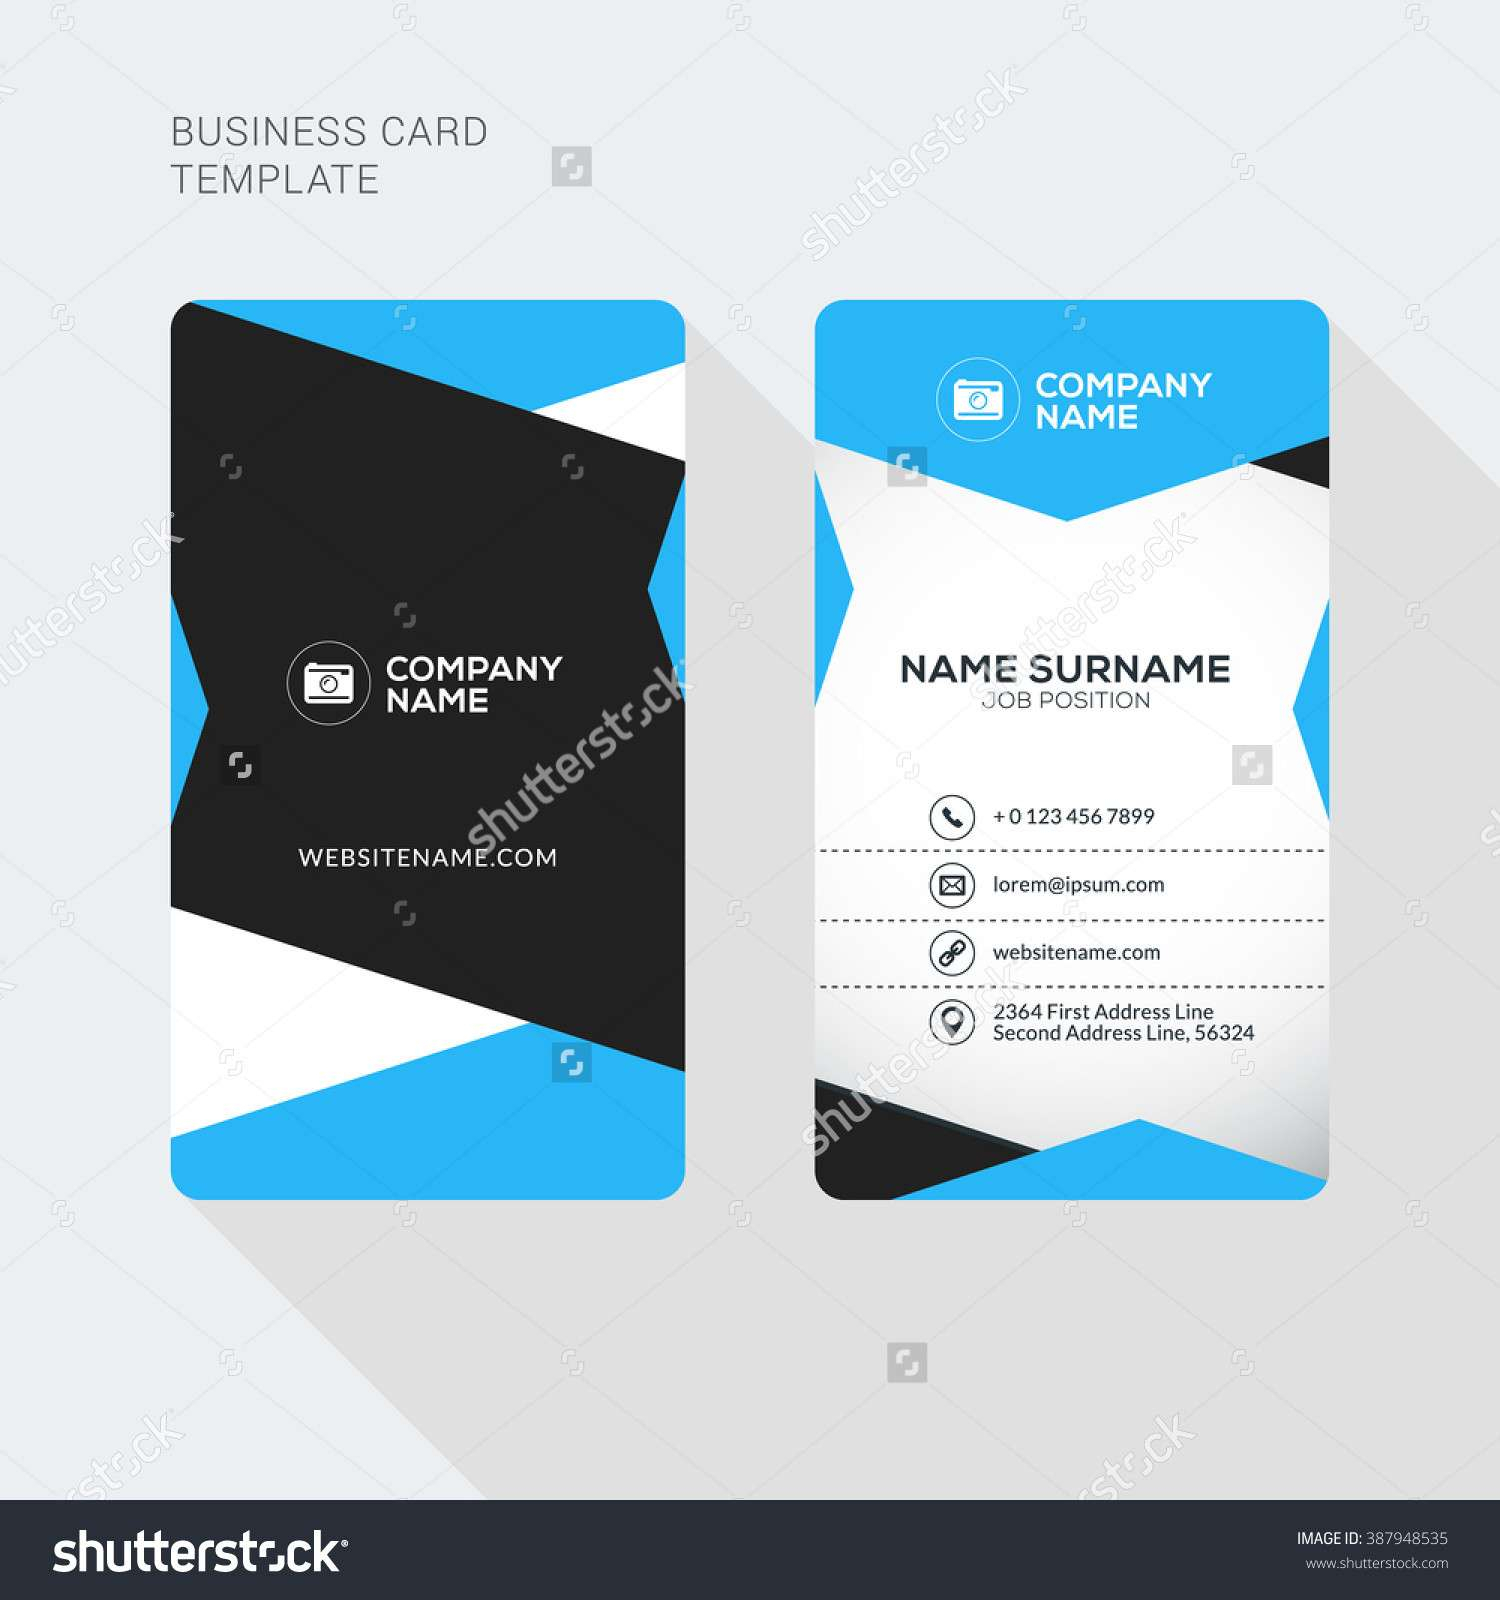 2 Sided Business Card Template Word Fresh 2 Sided Business For 2 Sided Business Card Template Word